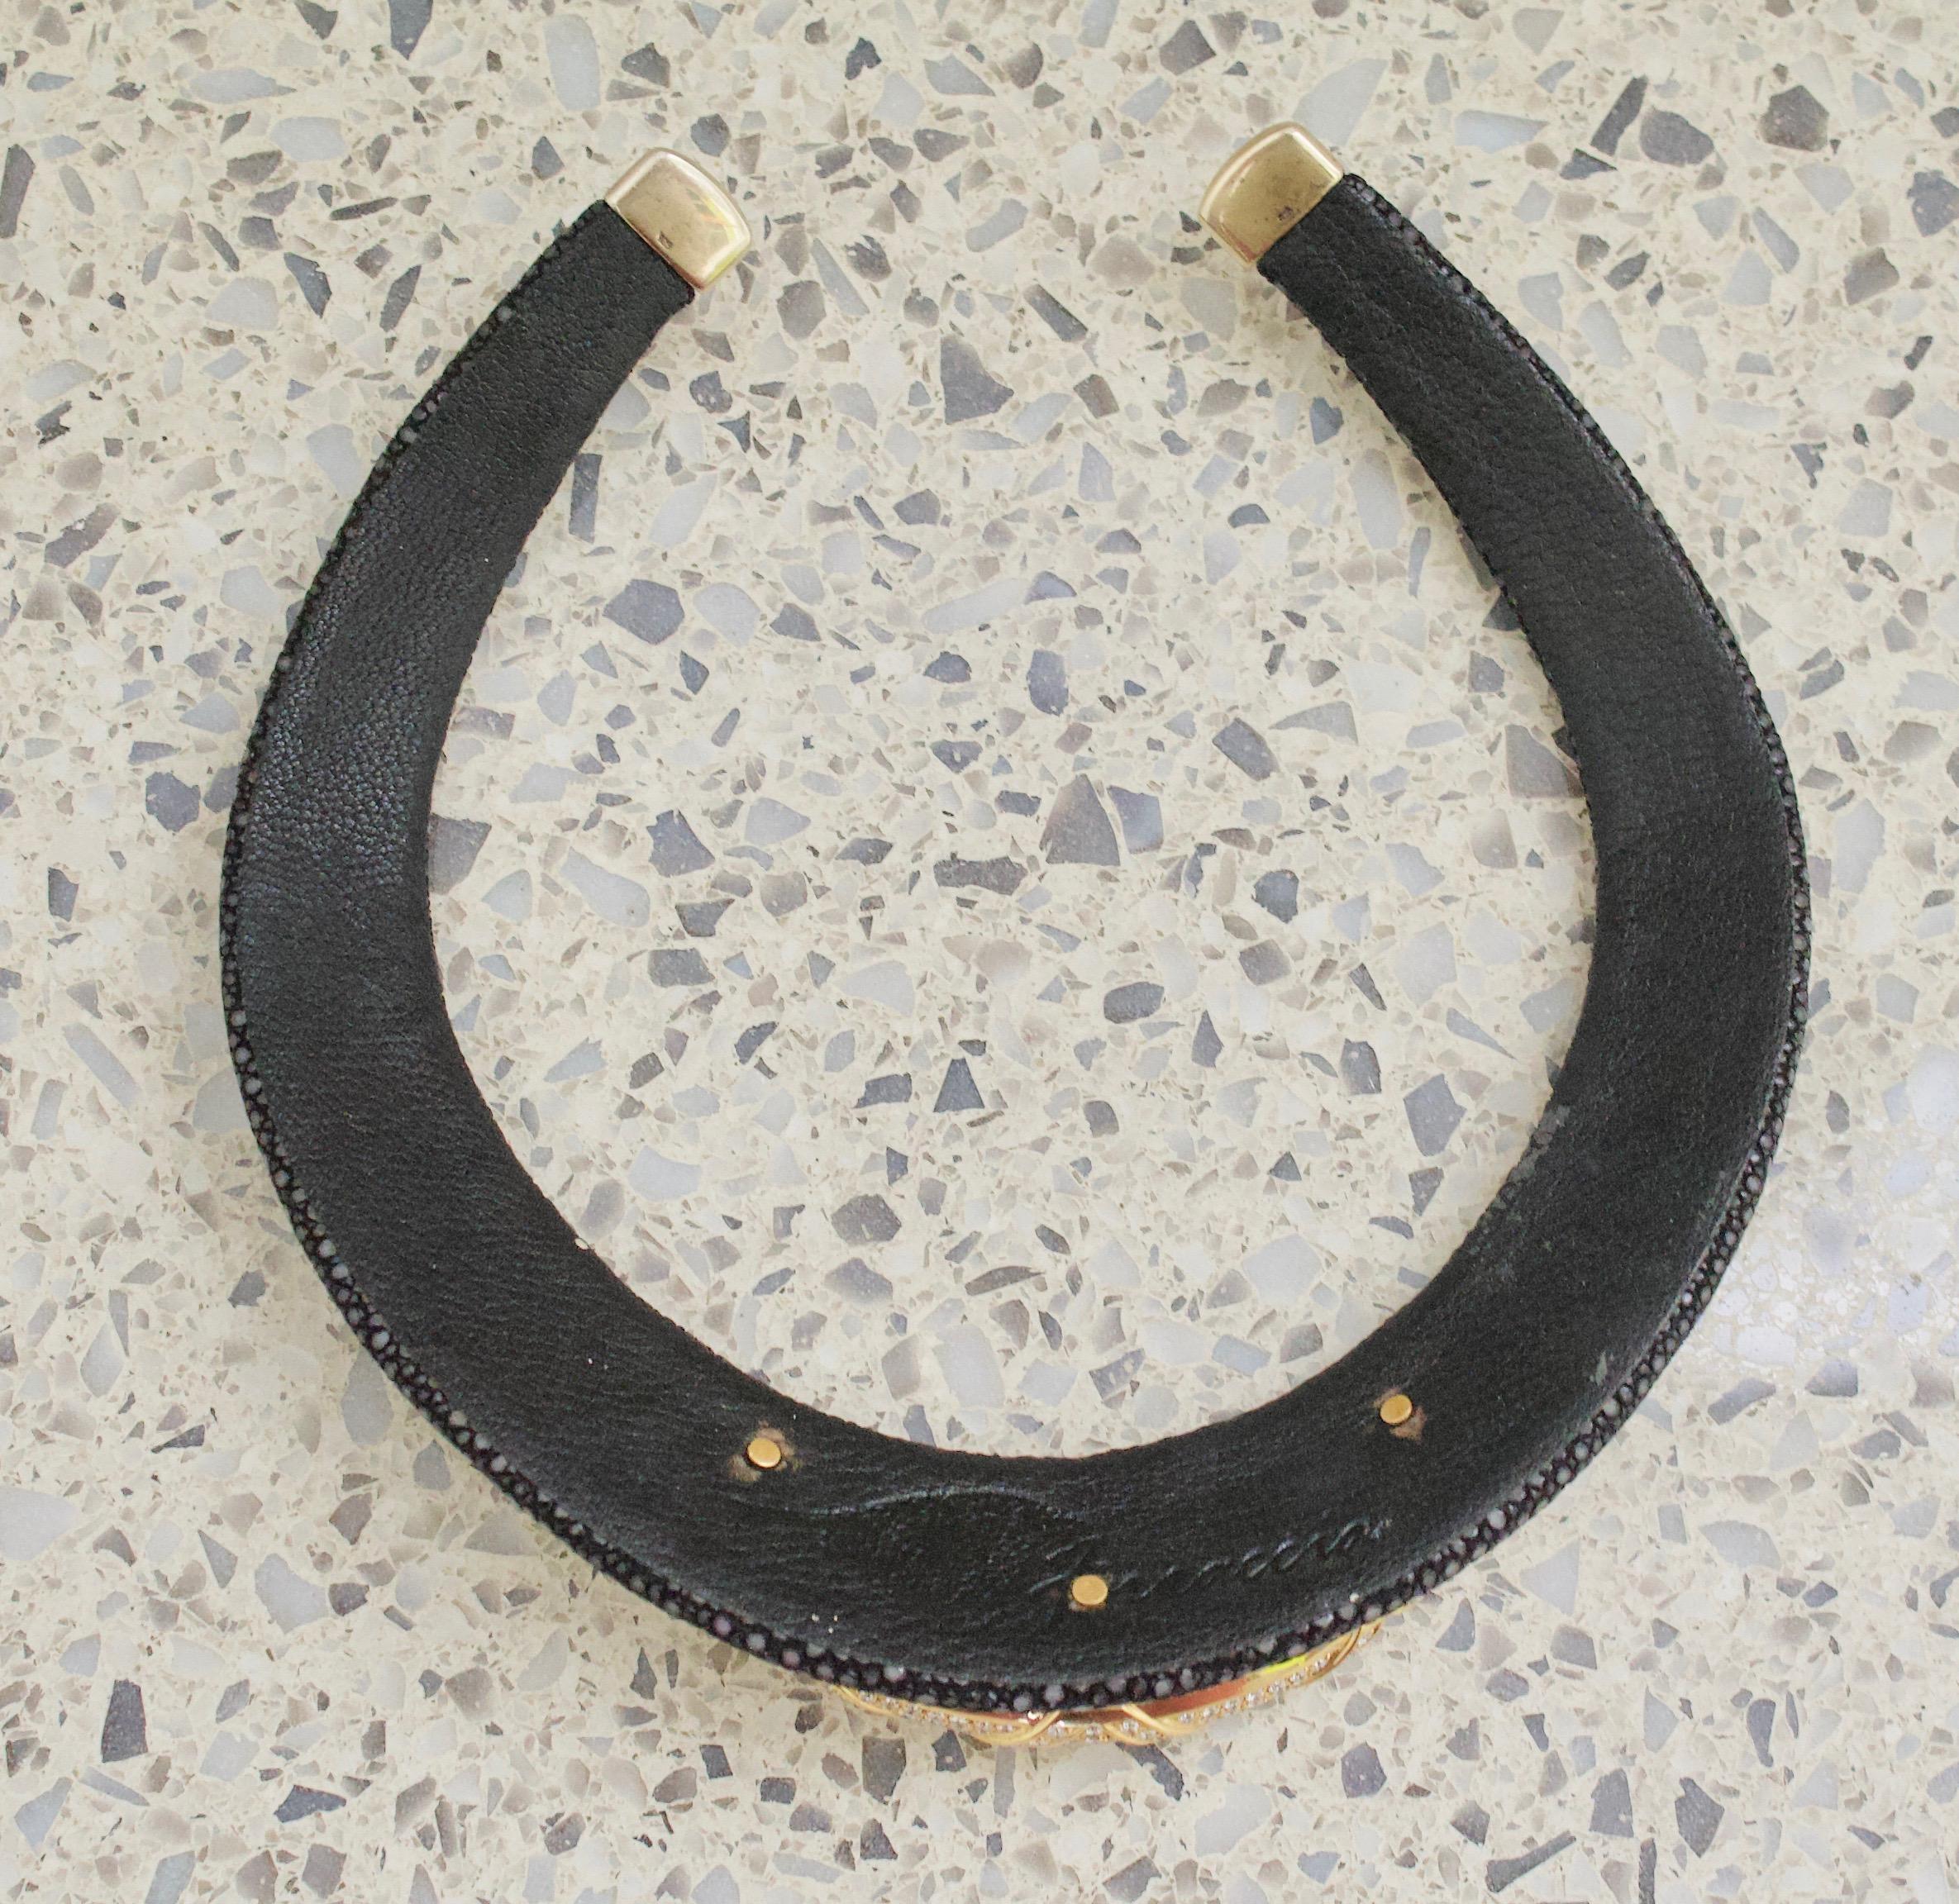 Diamond and Sting Ray 18k Yellow Gold Collar In Excellent Condition For Sale In Wailea, HI